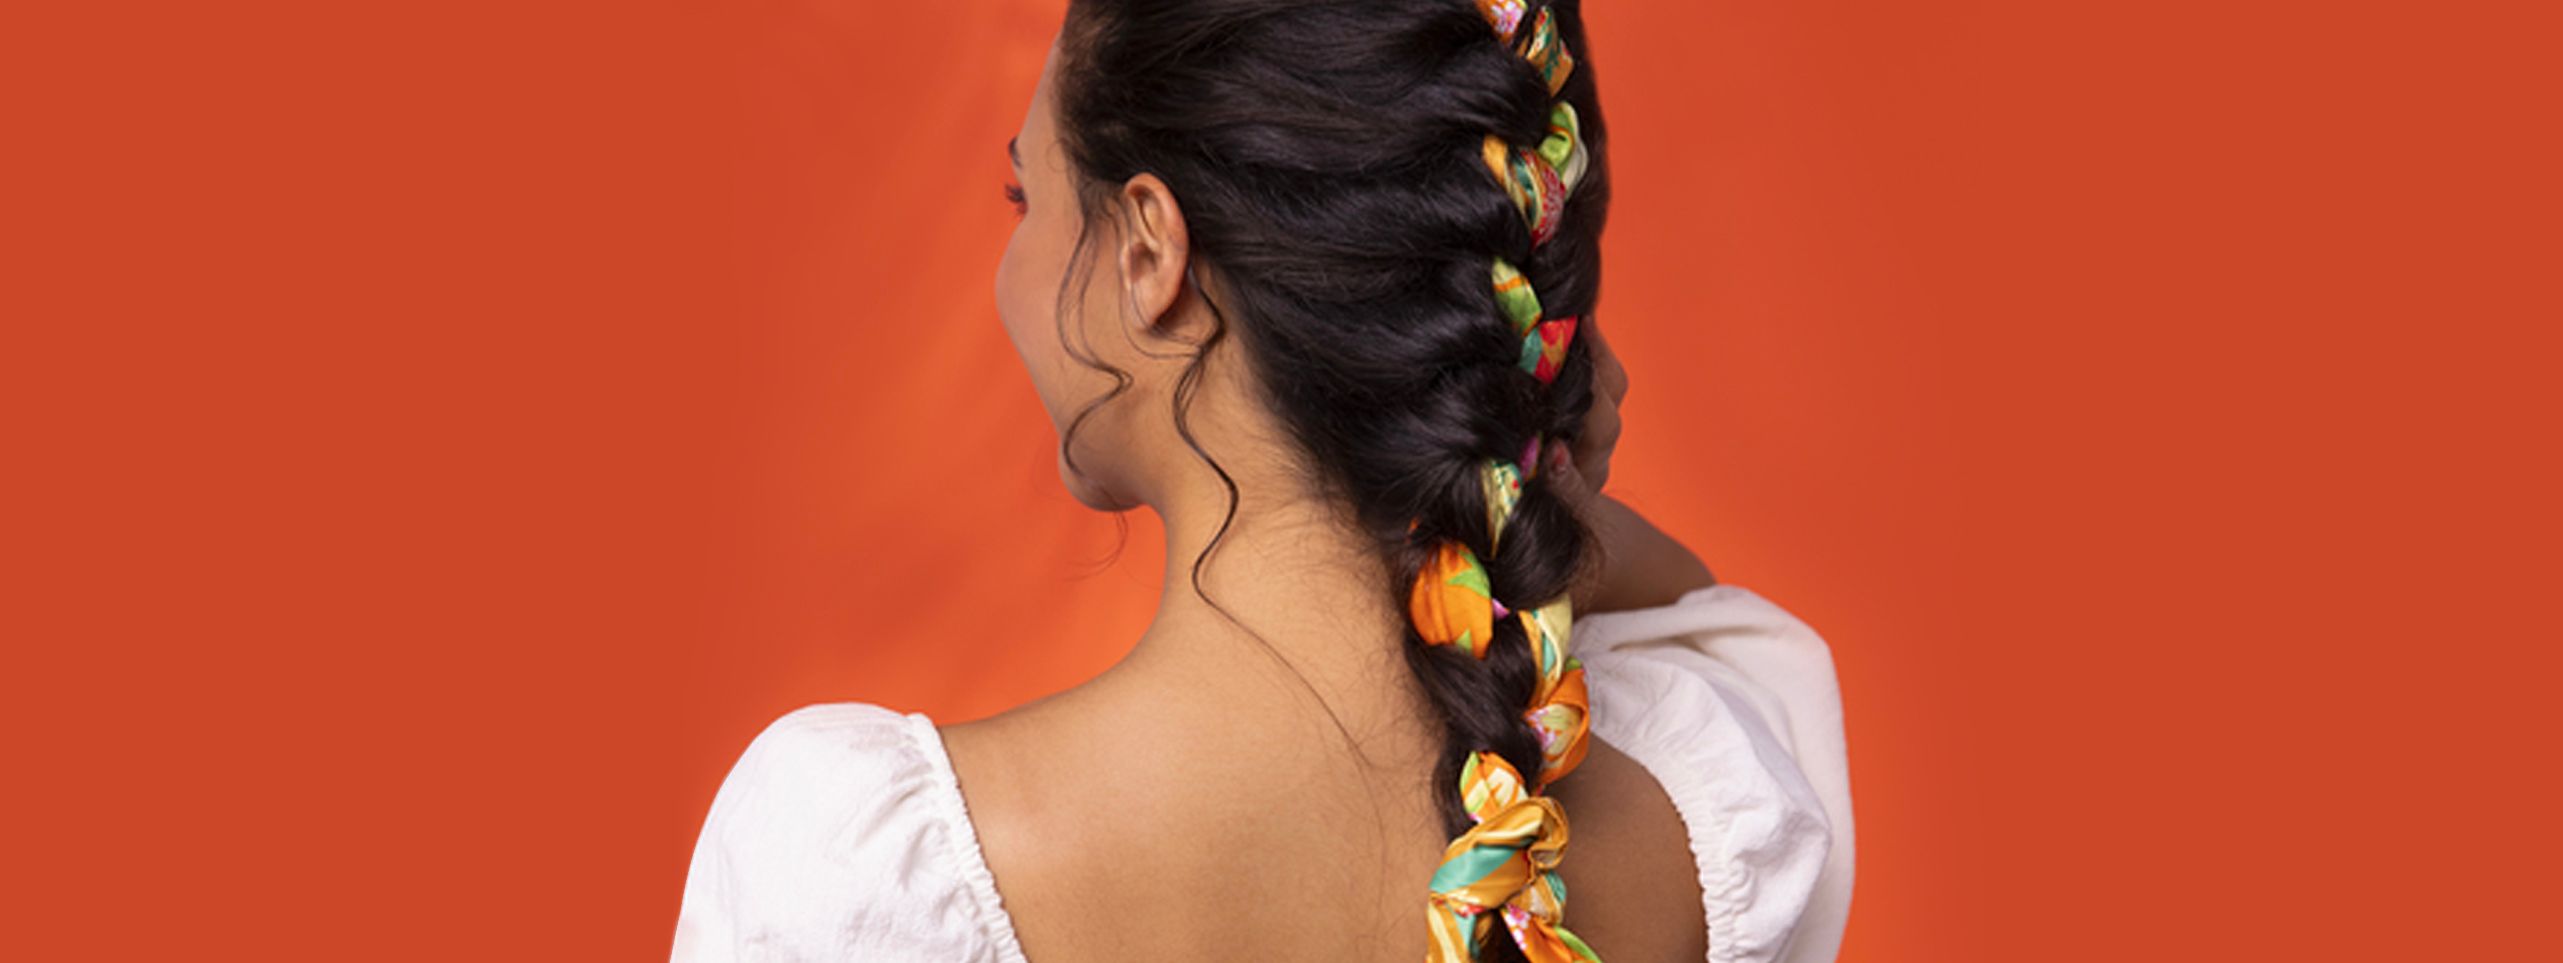 The 5 Best Festival Hairstyles: How to Get the Look!